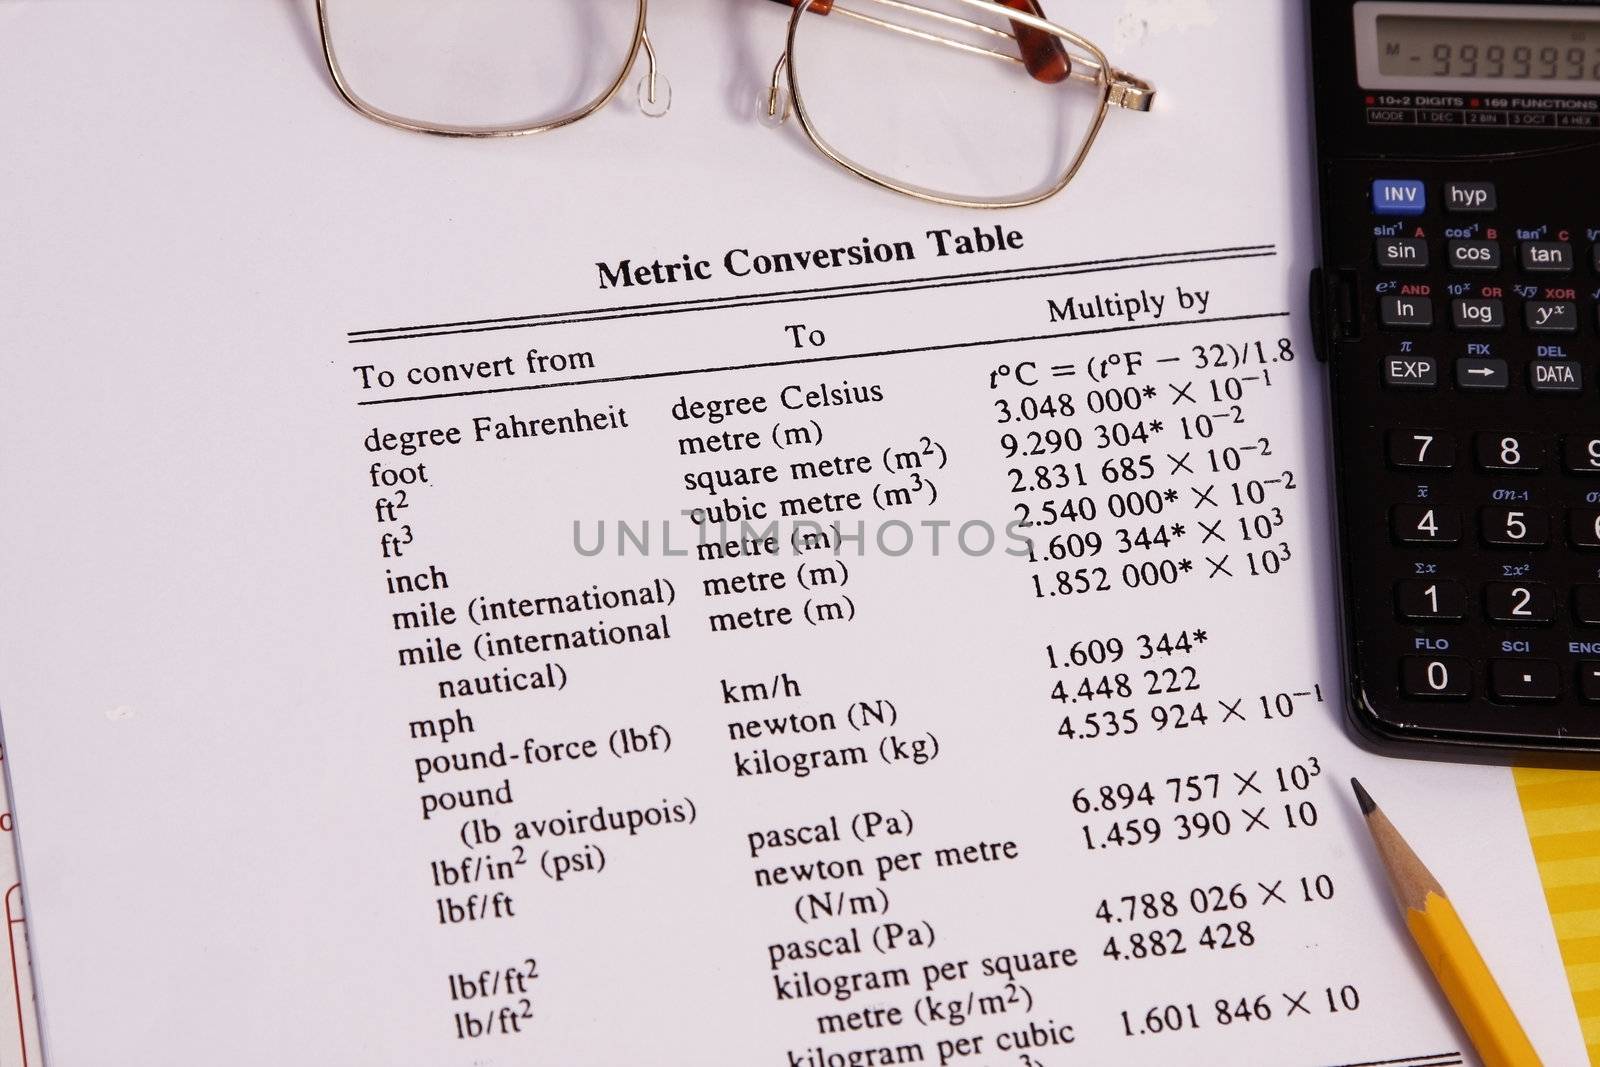 Conversion  Table - many uses in engineering and construction industry.